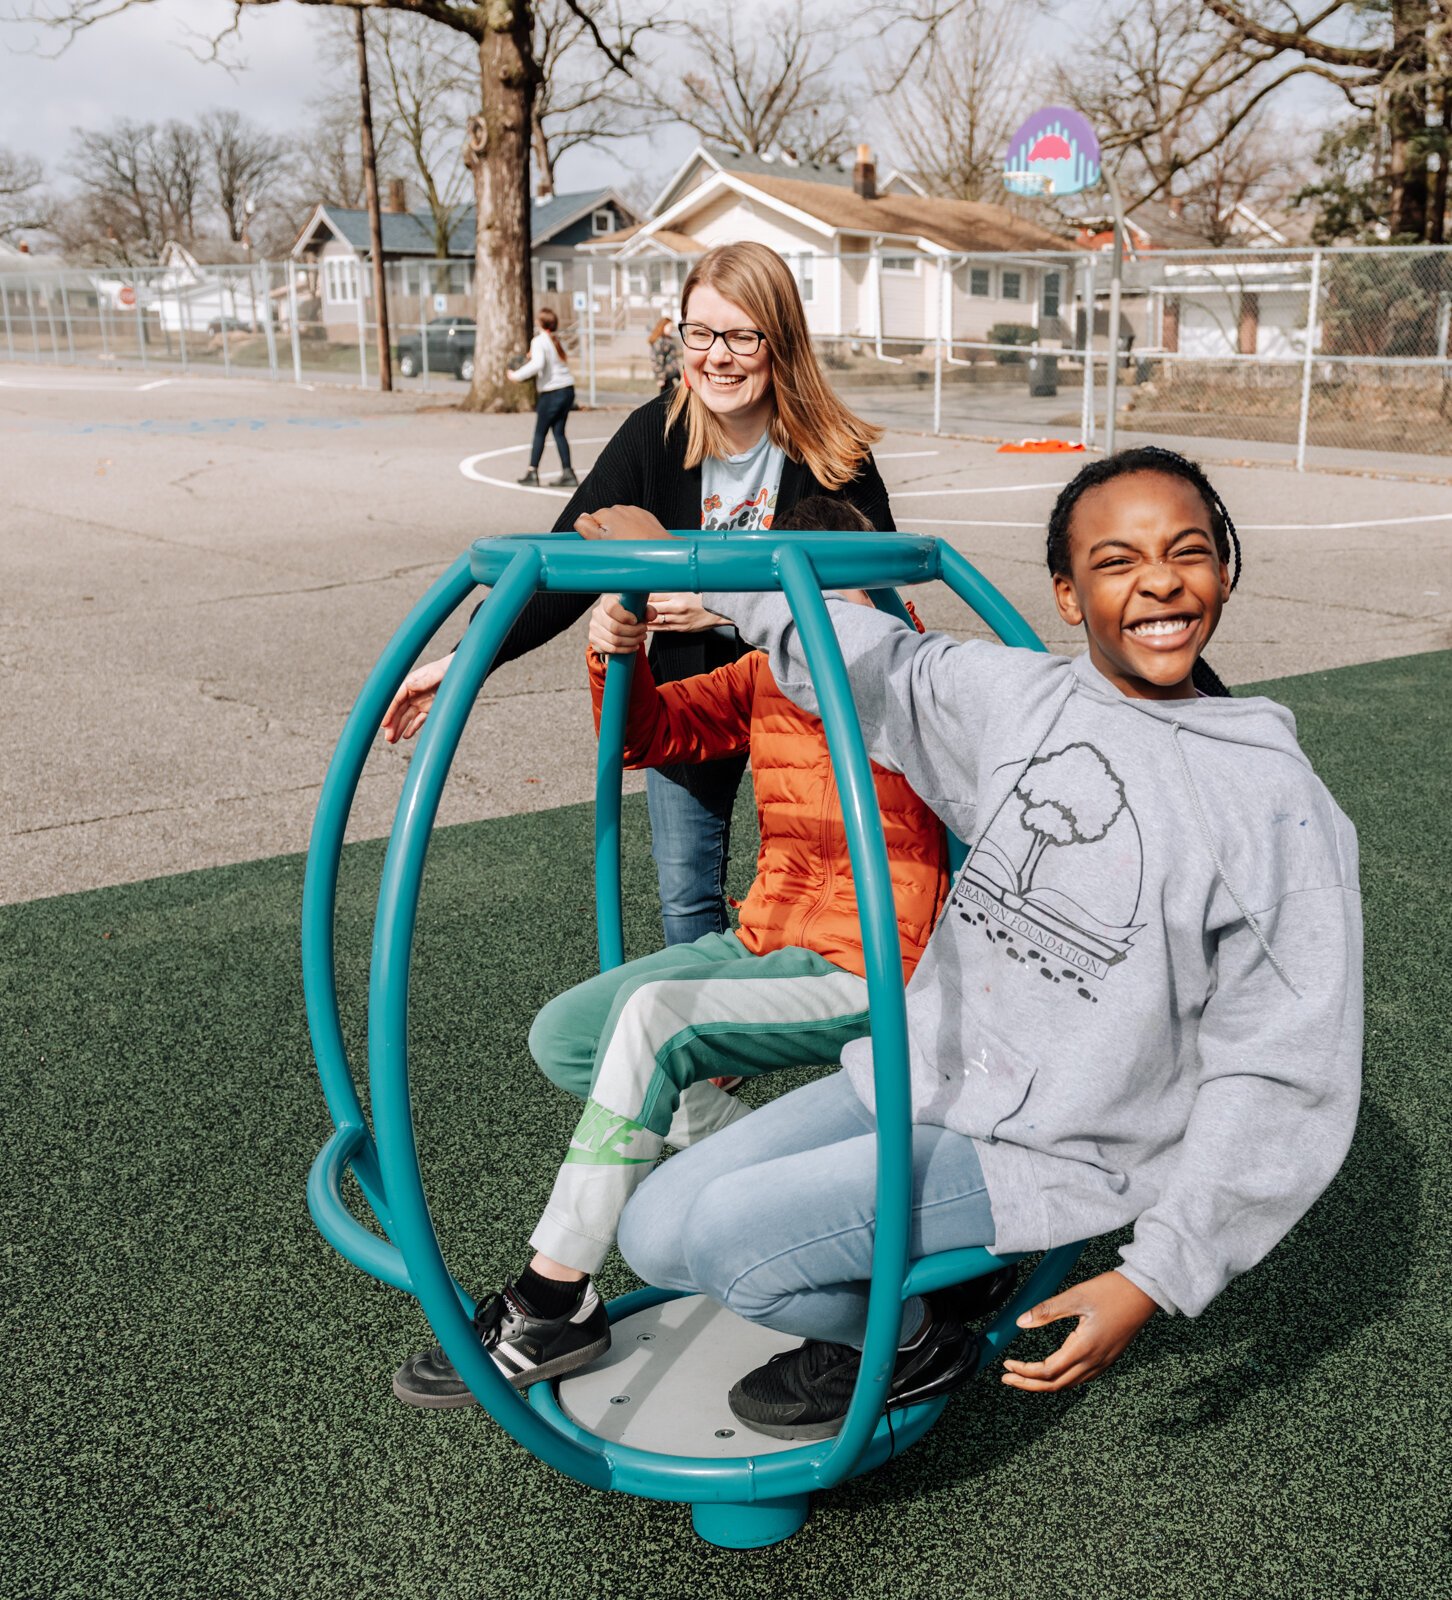 Leitia McHugh helps students Kaniyah Lacey and Spencer McComas on the Comet Spinner during the fourth grade recess at Forest Park Elementary School.